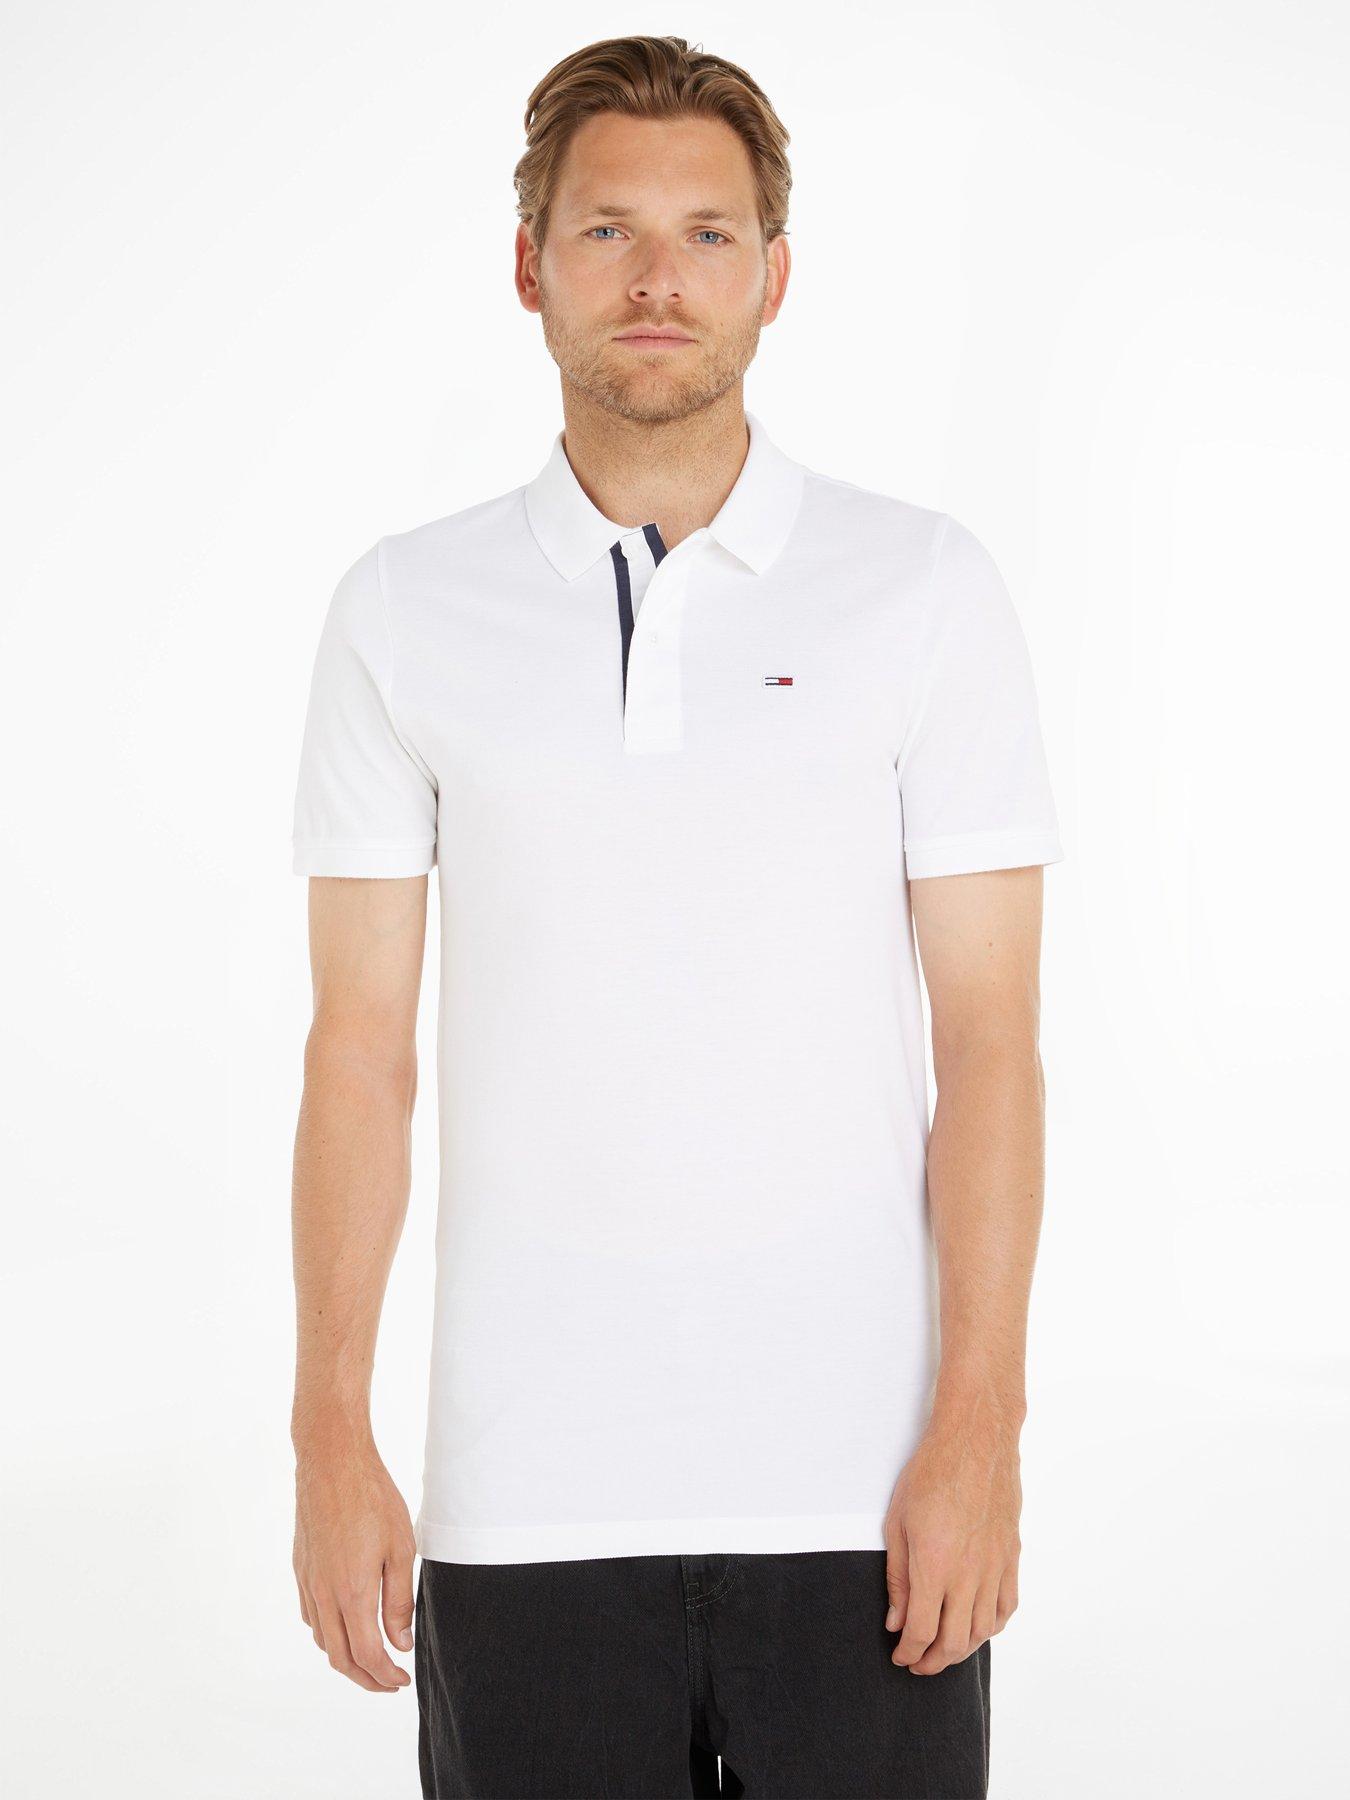 hilfiger | | | T-shirts White & Tommy polos | Ireland Very Men